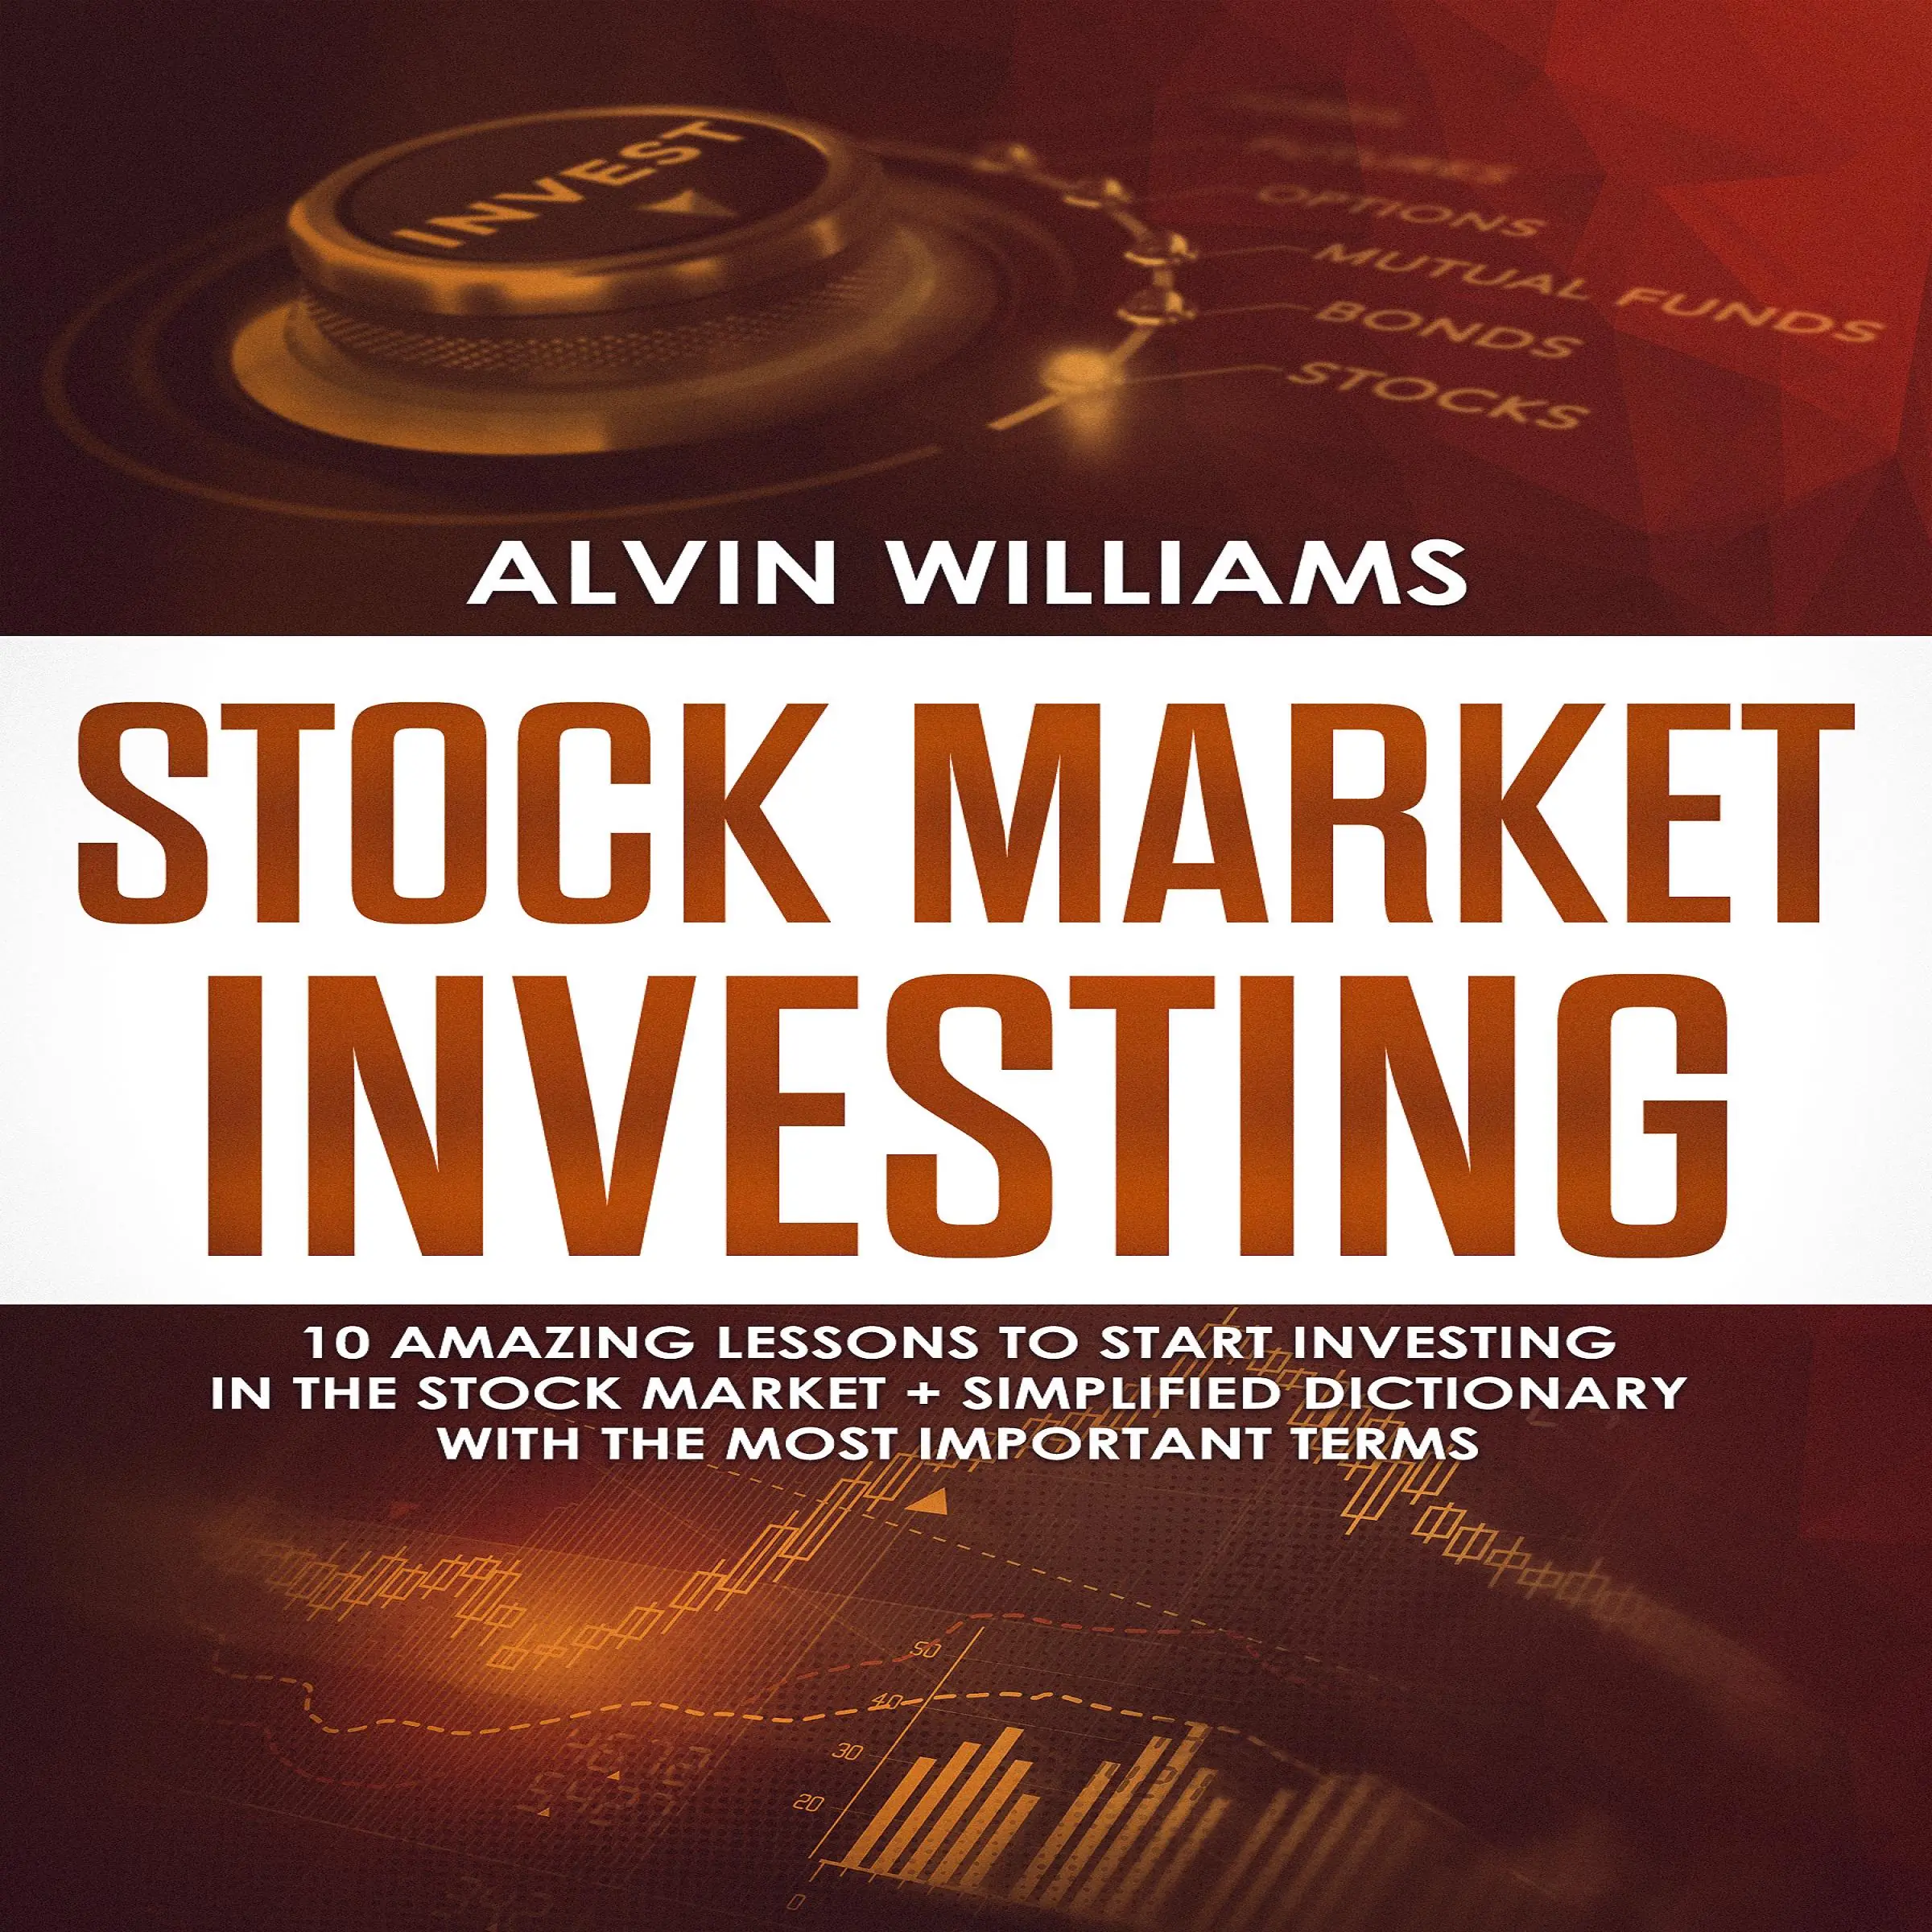 Stock Market Investing: 10 Amazing Lessons to start Investing in the Stock Market + Simplified Dictionary with the Most Important Terms Audiobook by Alvin Williams